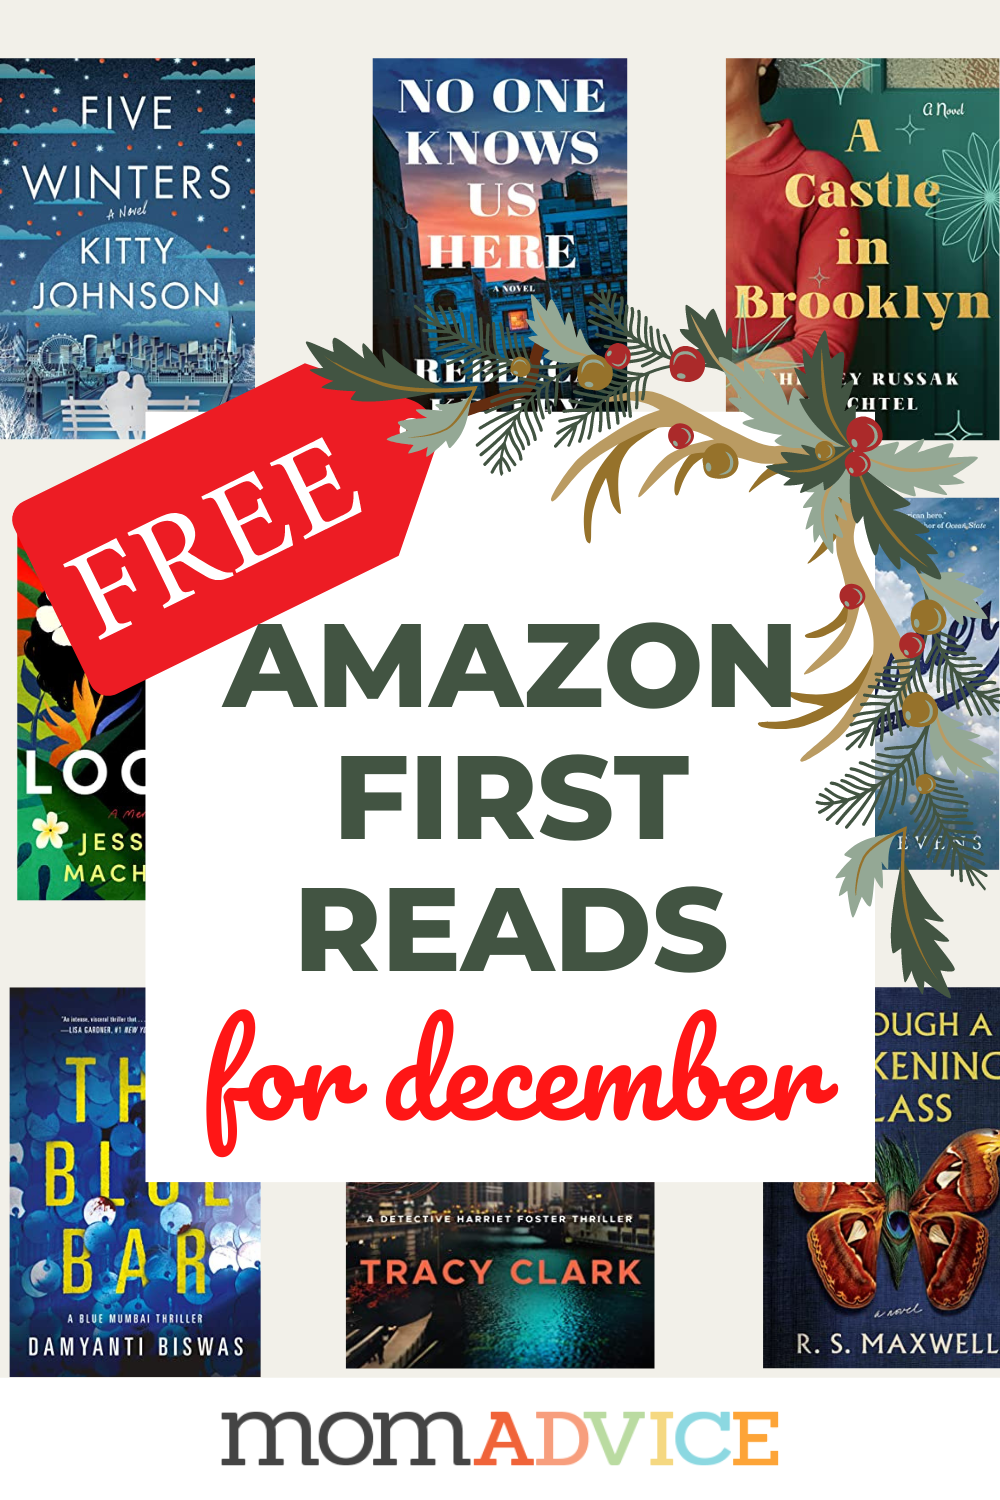 Amazon First Reads for December (Get Your FREE Book)